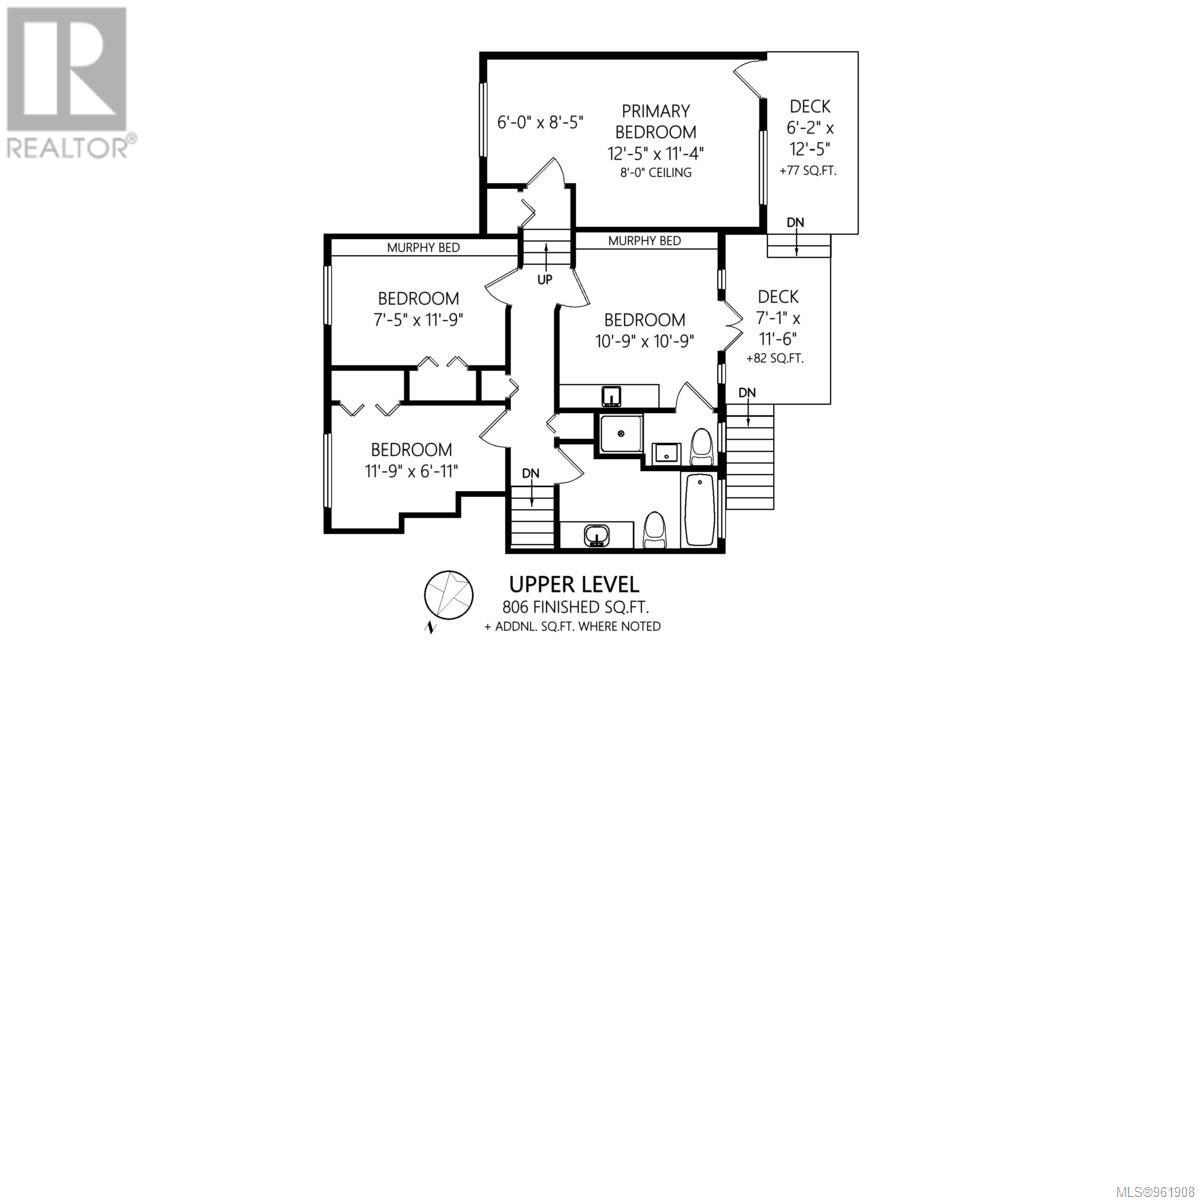  9559 Lapwing Place, Sidney